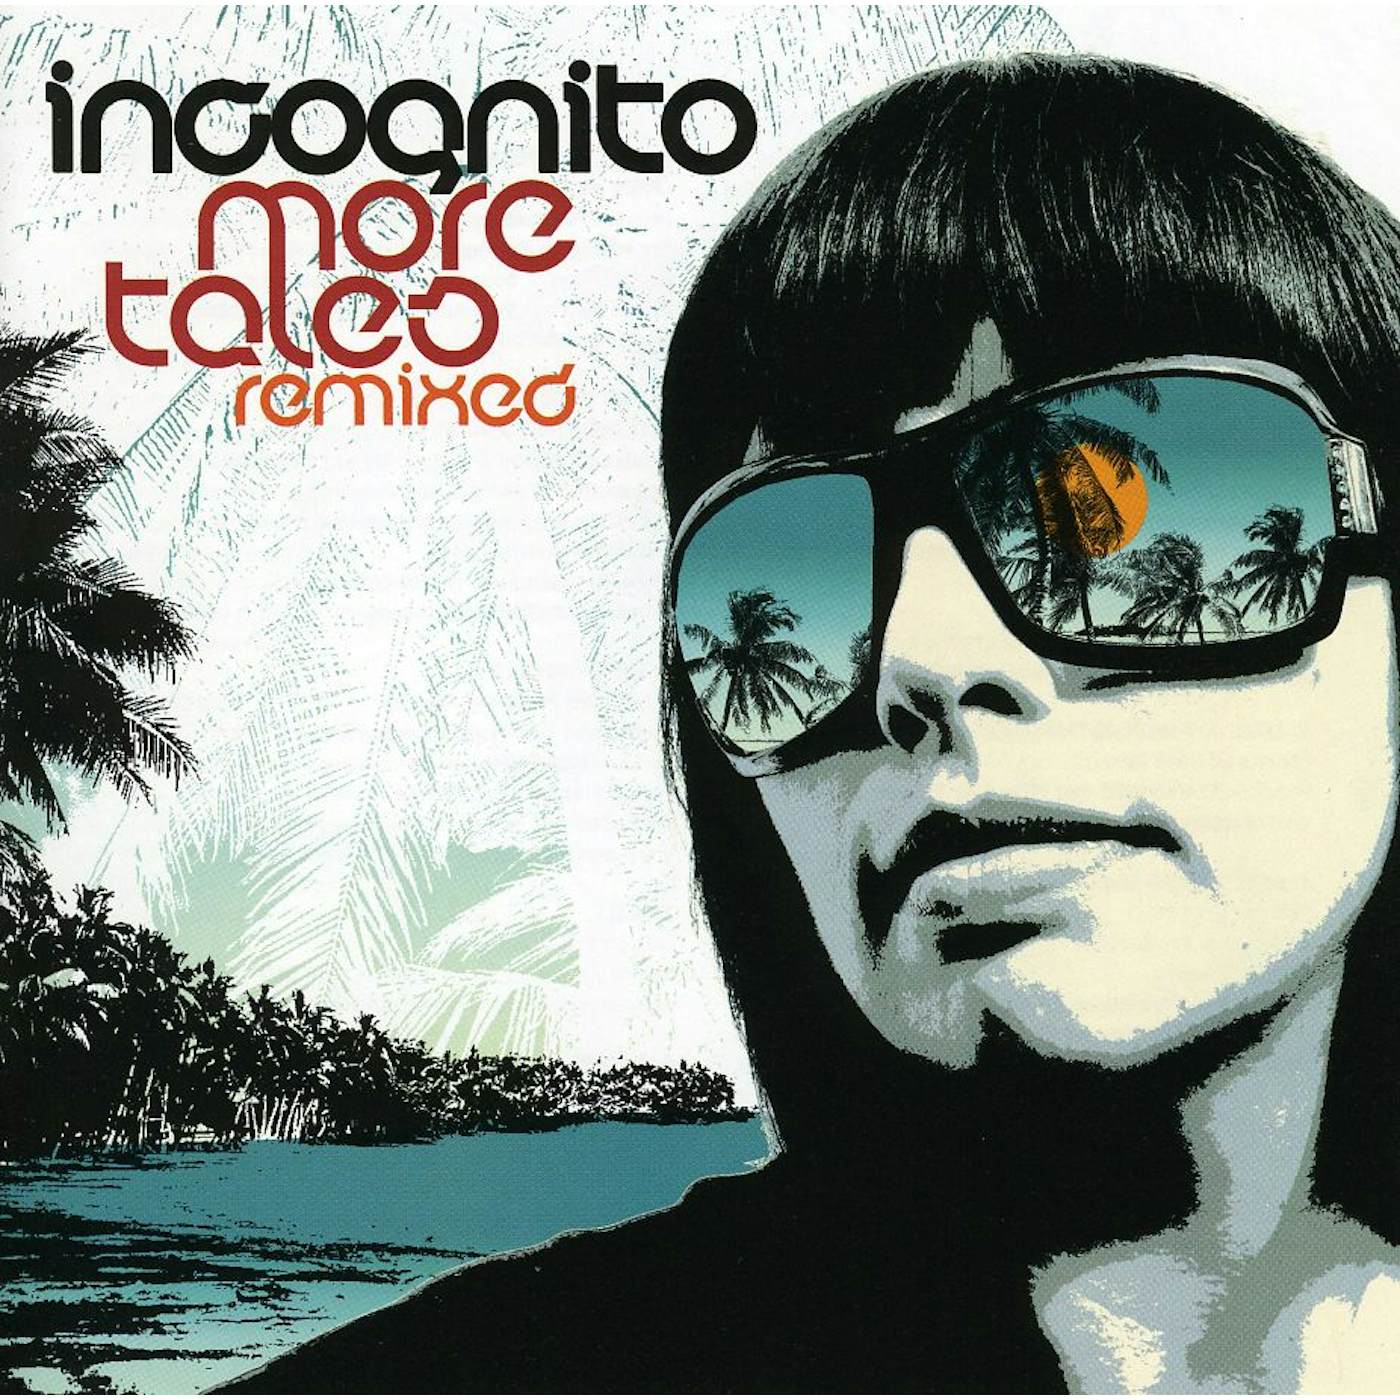 Incognito MORE TALES REMIXED CD